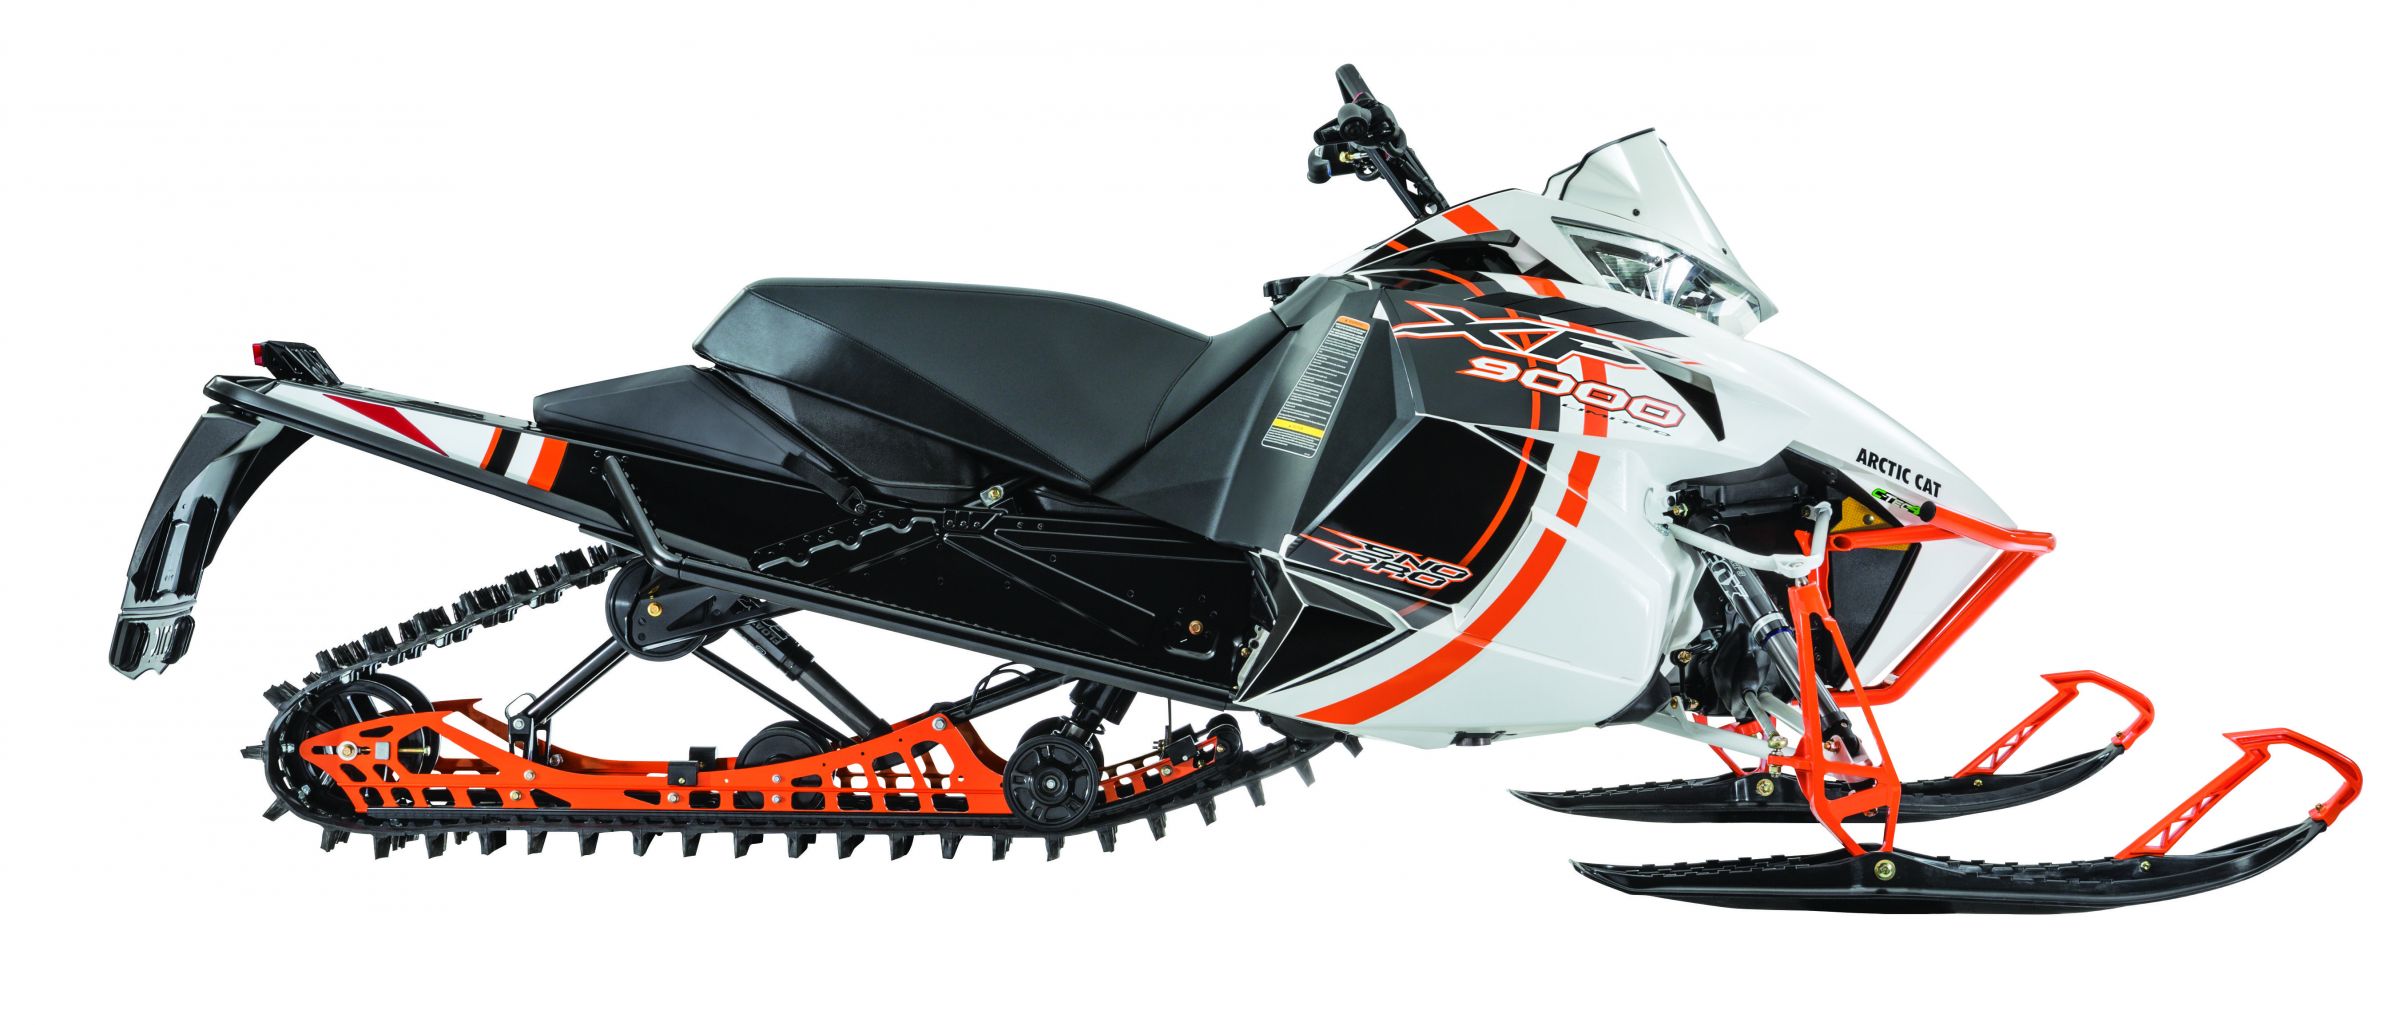 Arctic Cat XF 9000 High Country 1056cc photo - 5